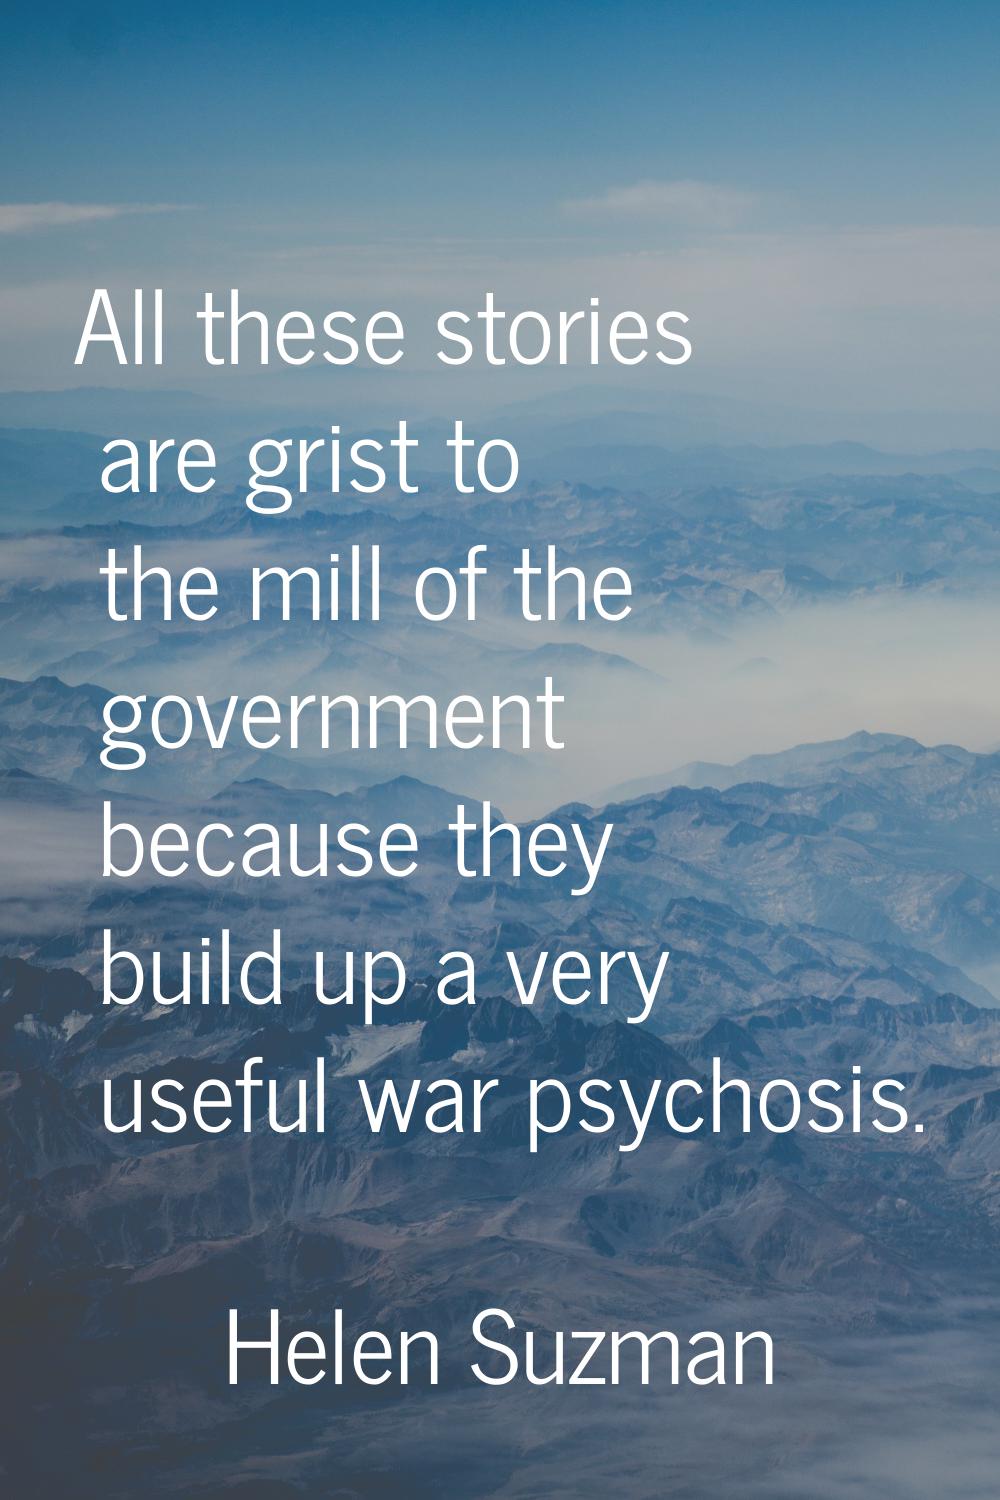 All these stories are grist to the mill of the government because they build up a very useful war p